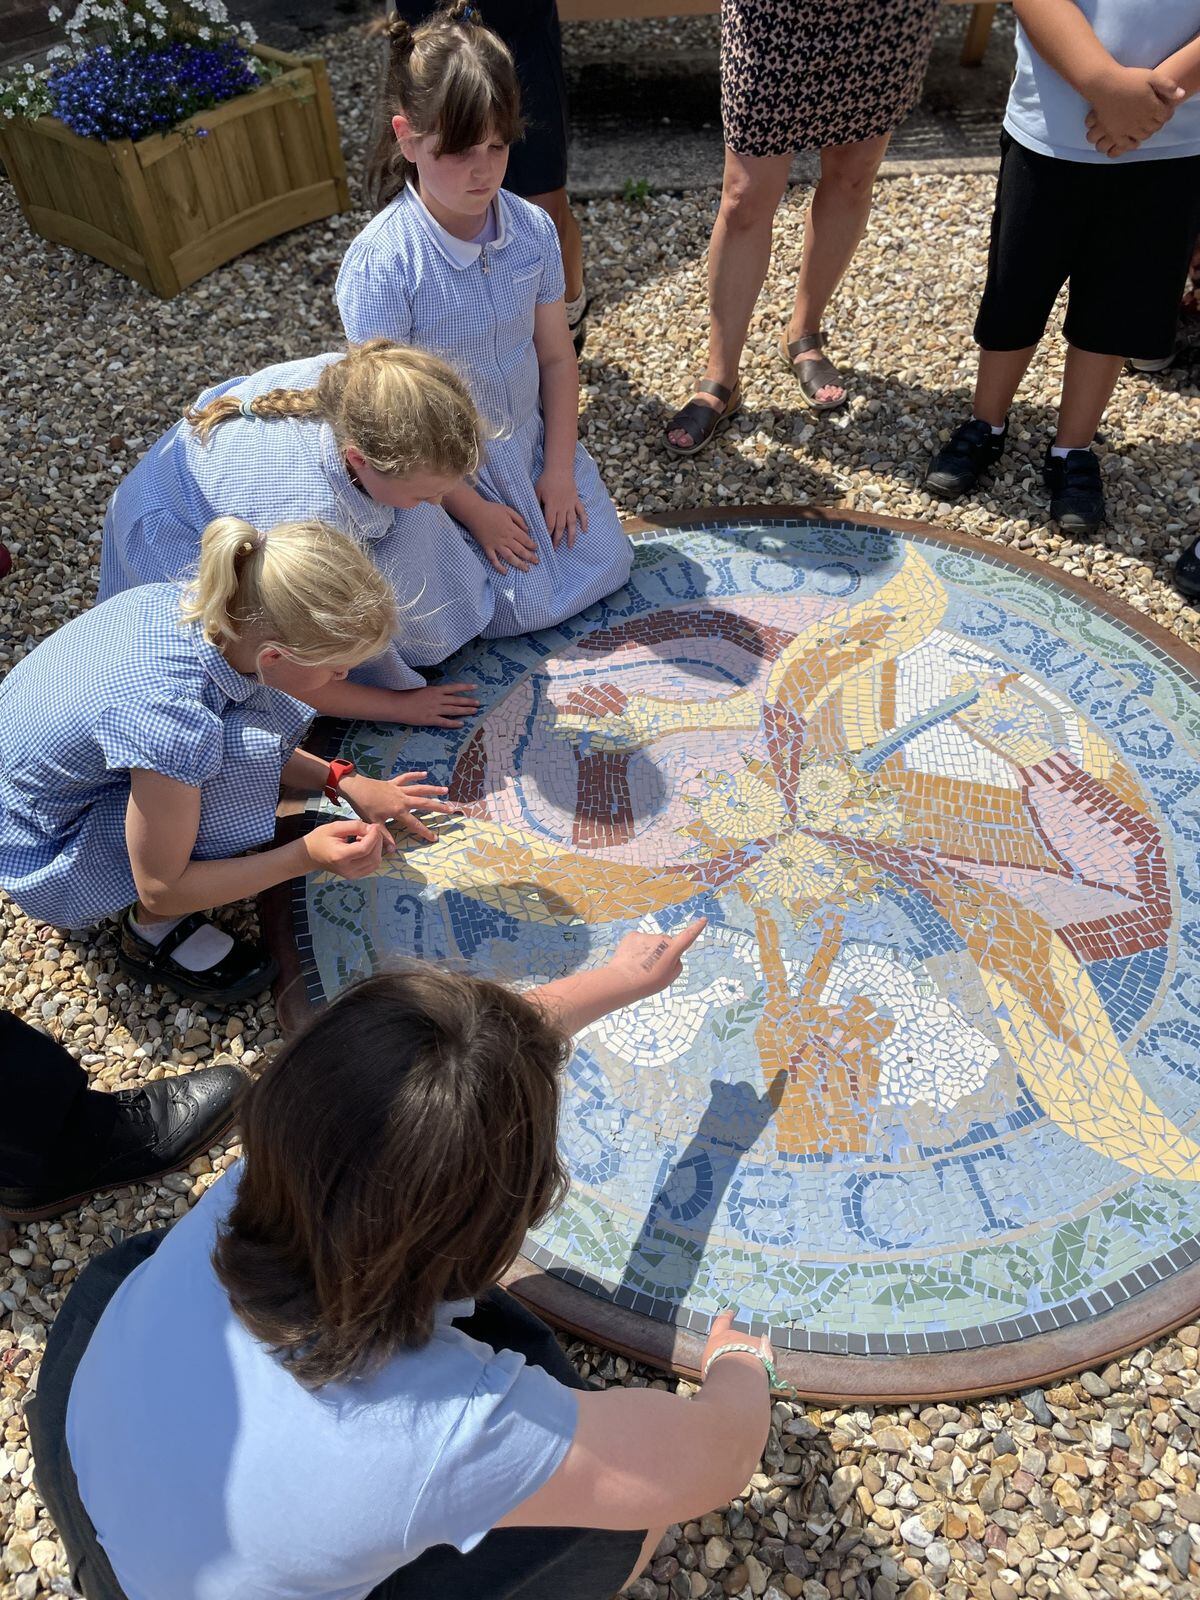 The mosaic at Meole Brace CofE Primary